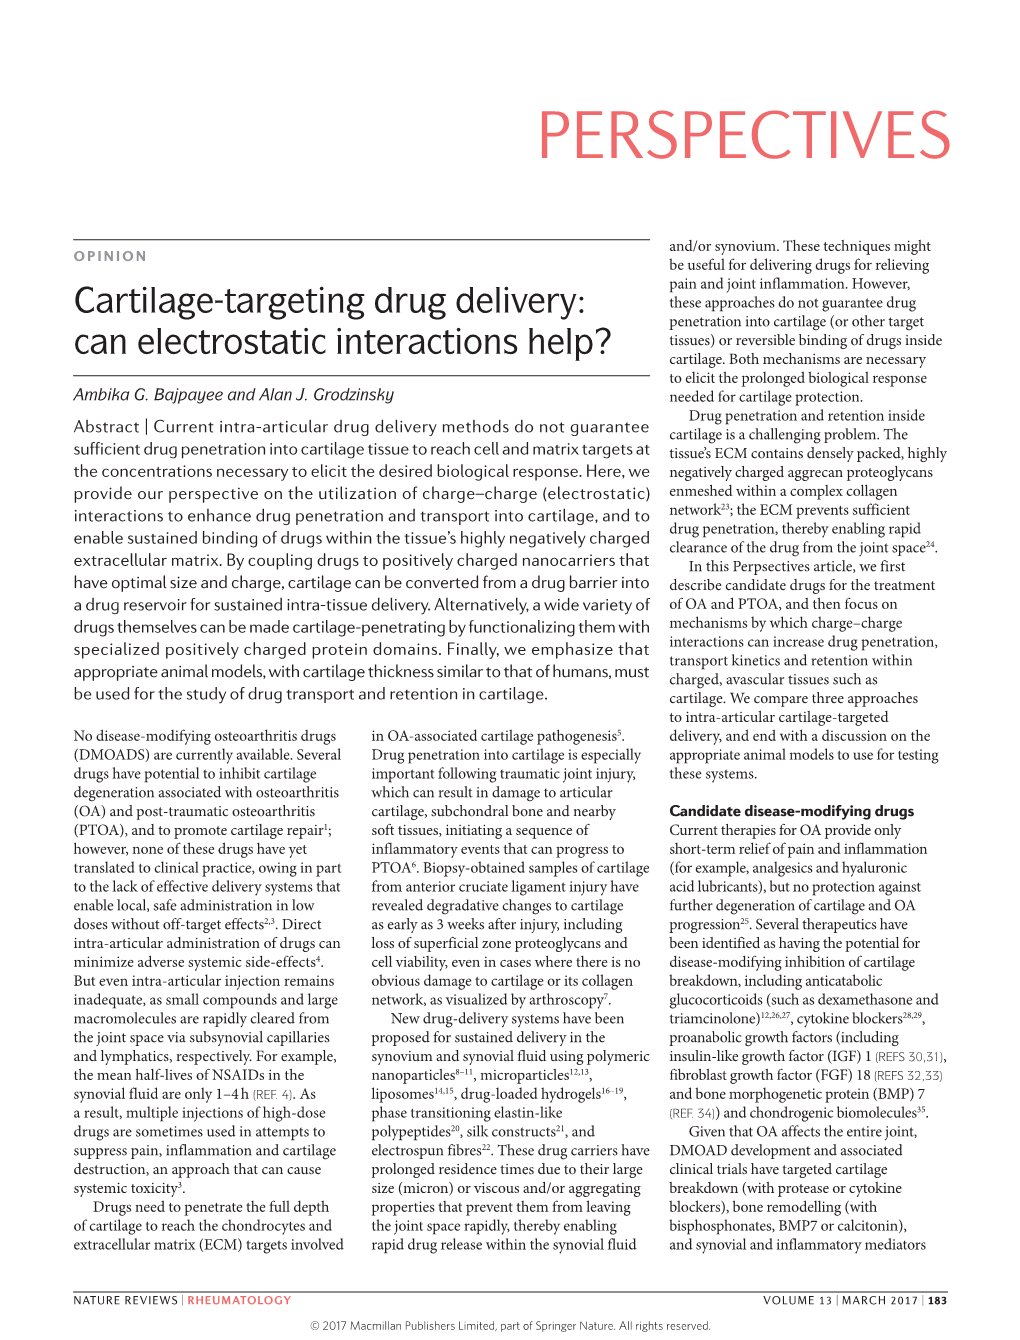 Cartilage-Targeting Drug Delivery: Can Electrostatic Interactions Help?